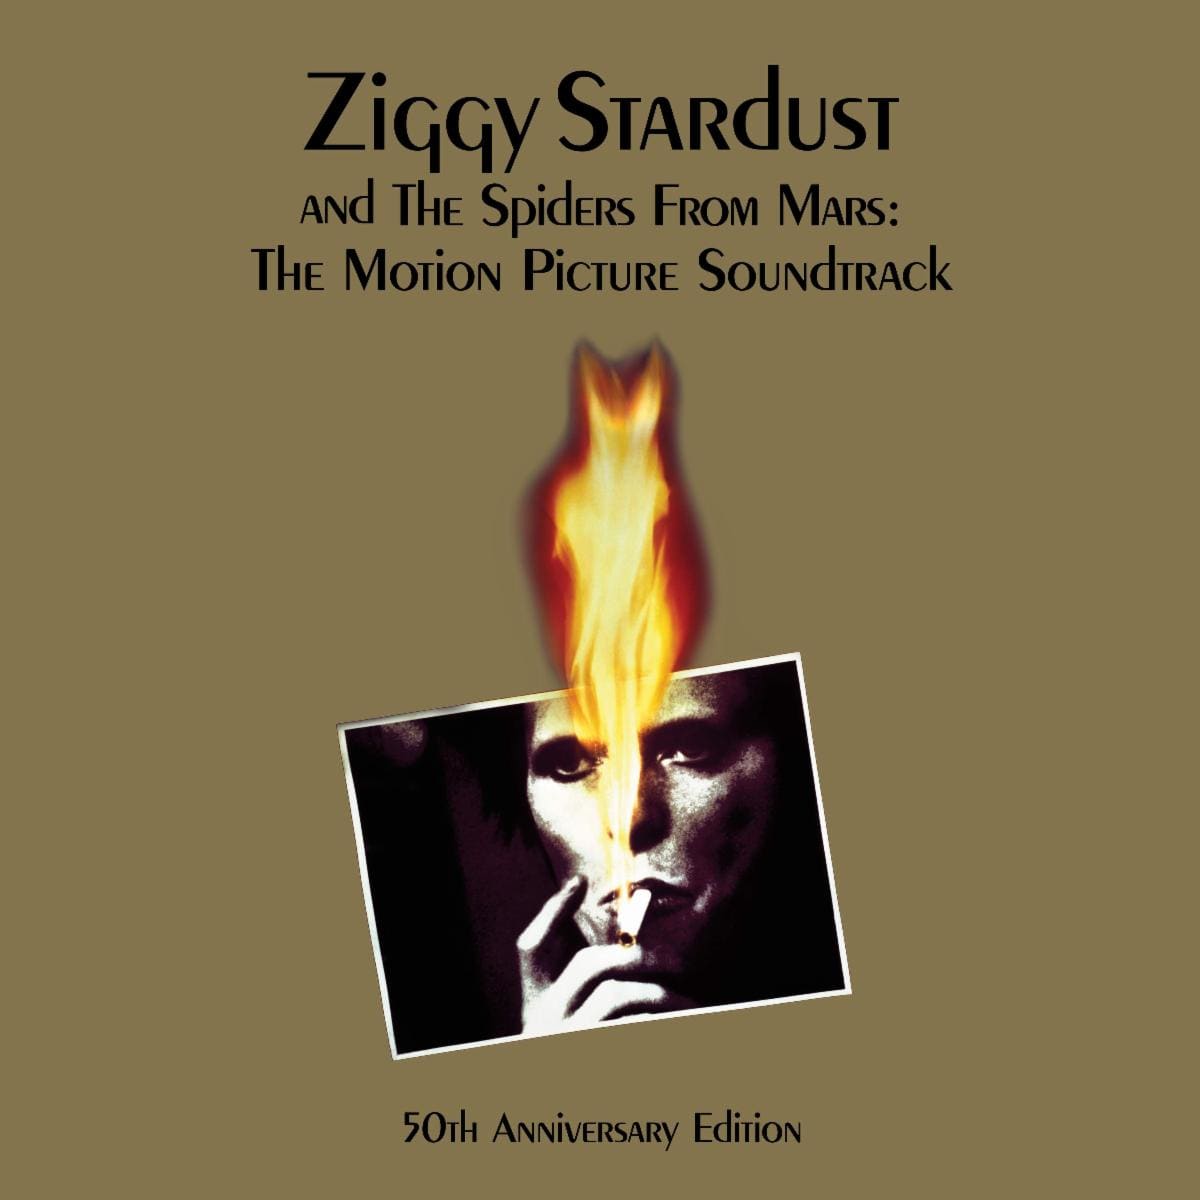 Details of final Ziggy Stardust performance with newly remastered